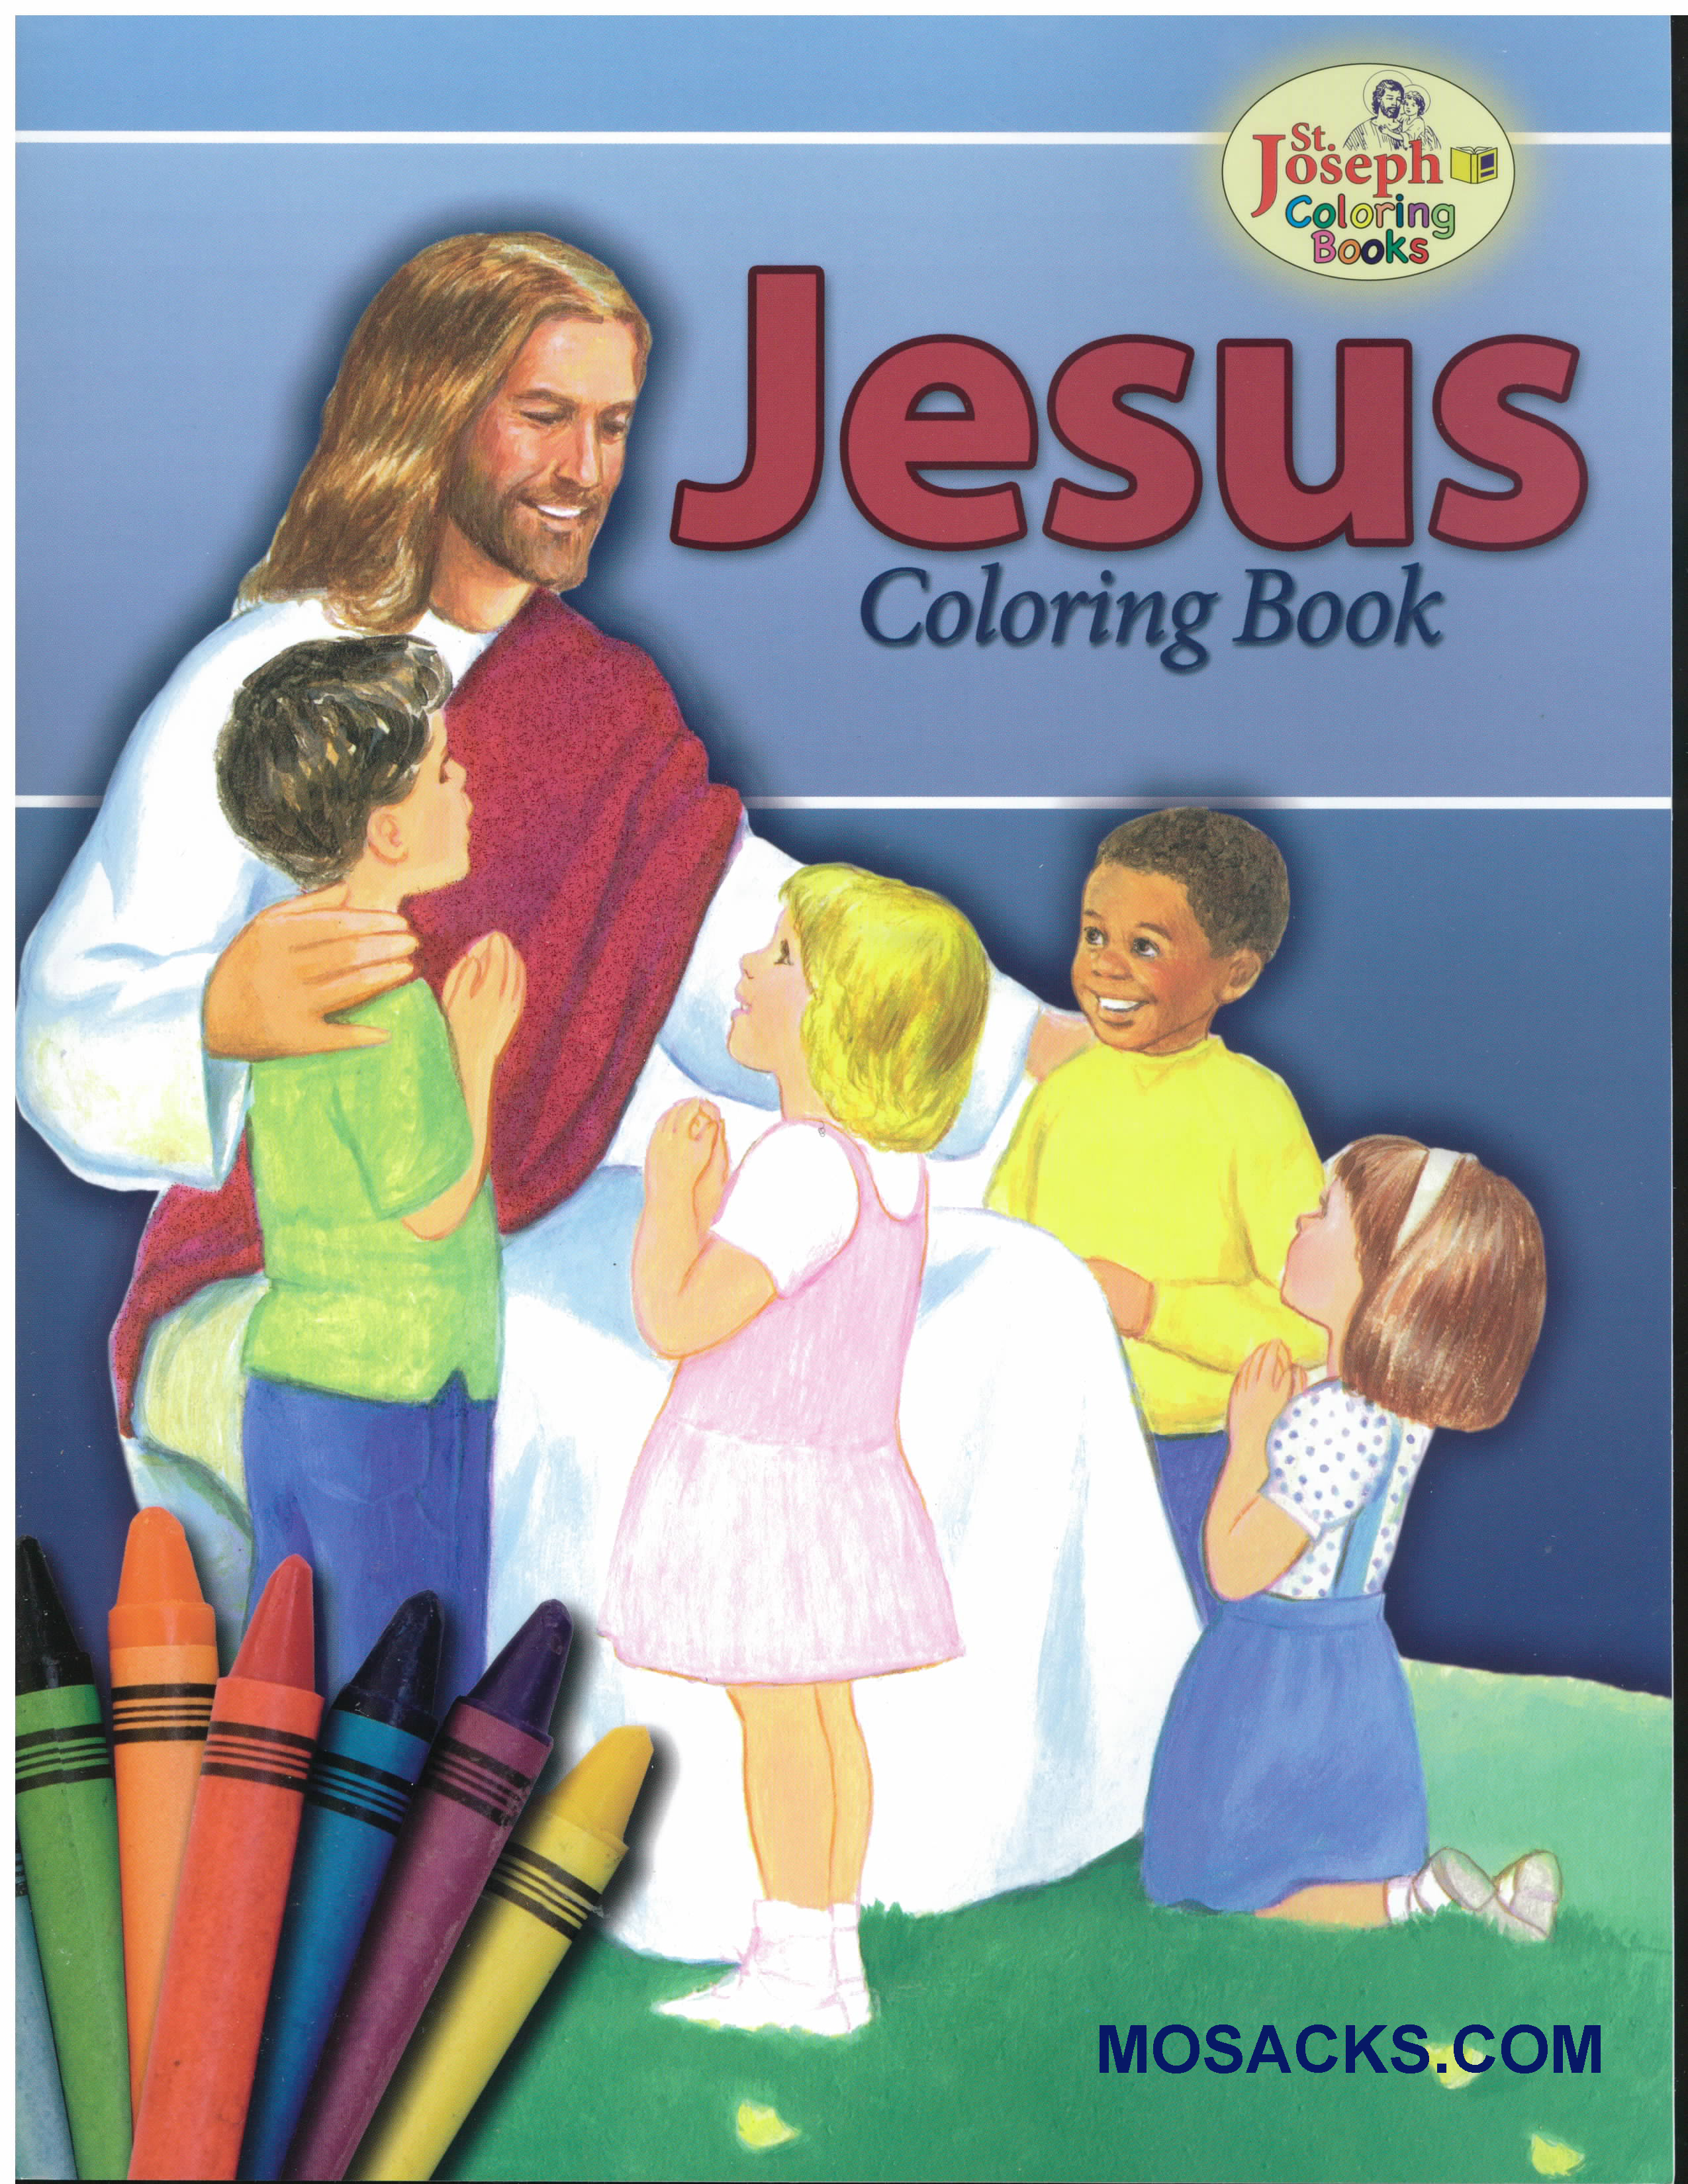 Coloring Book About Jesus-978089942670-9